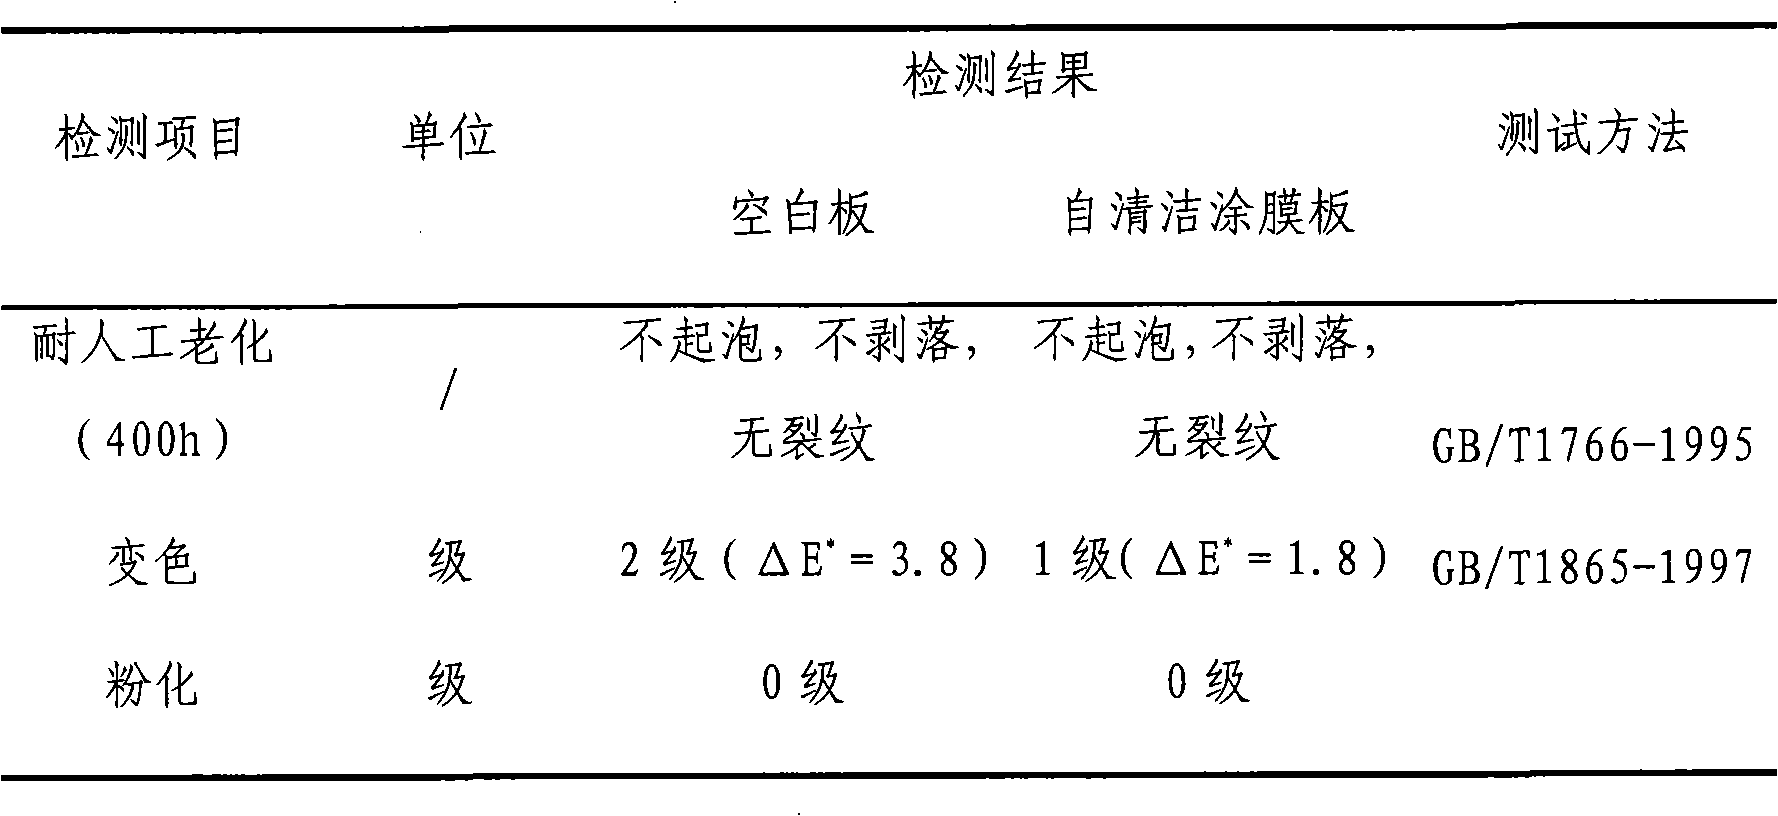 Self-cleaning coating agent for construction exterior wall paint, preparation and use method